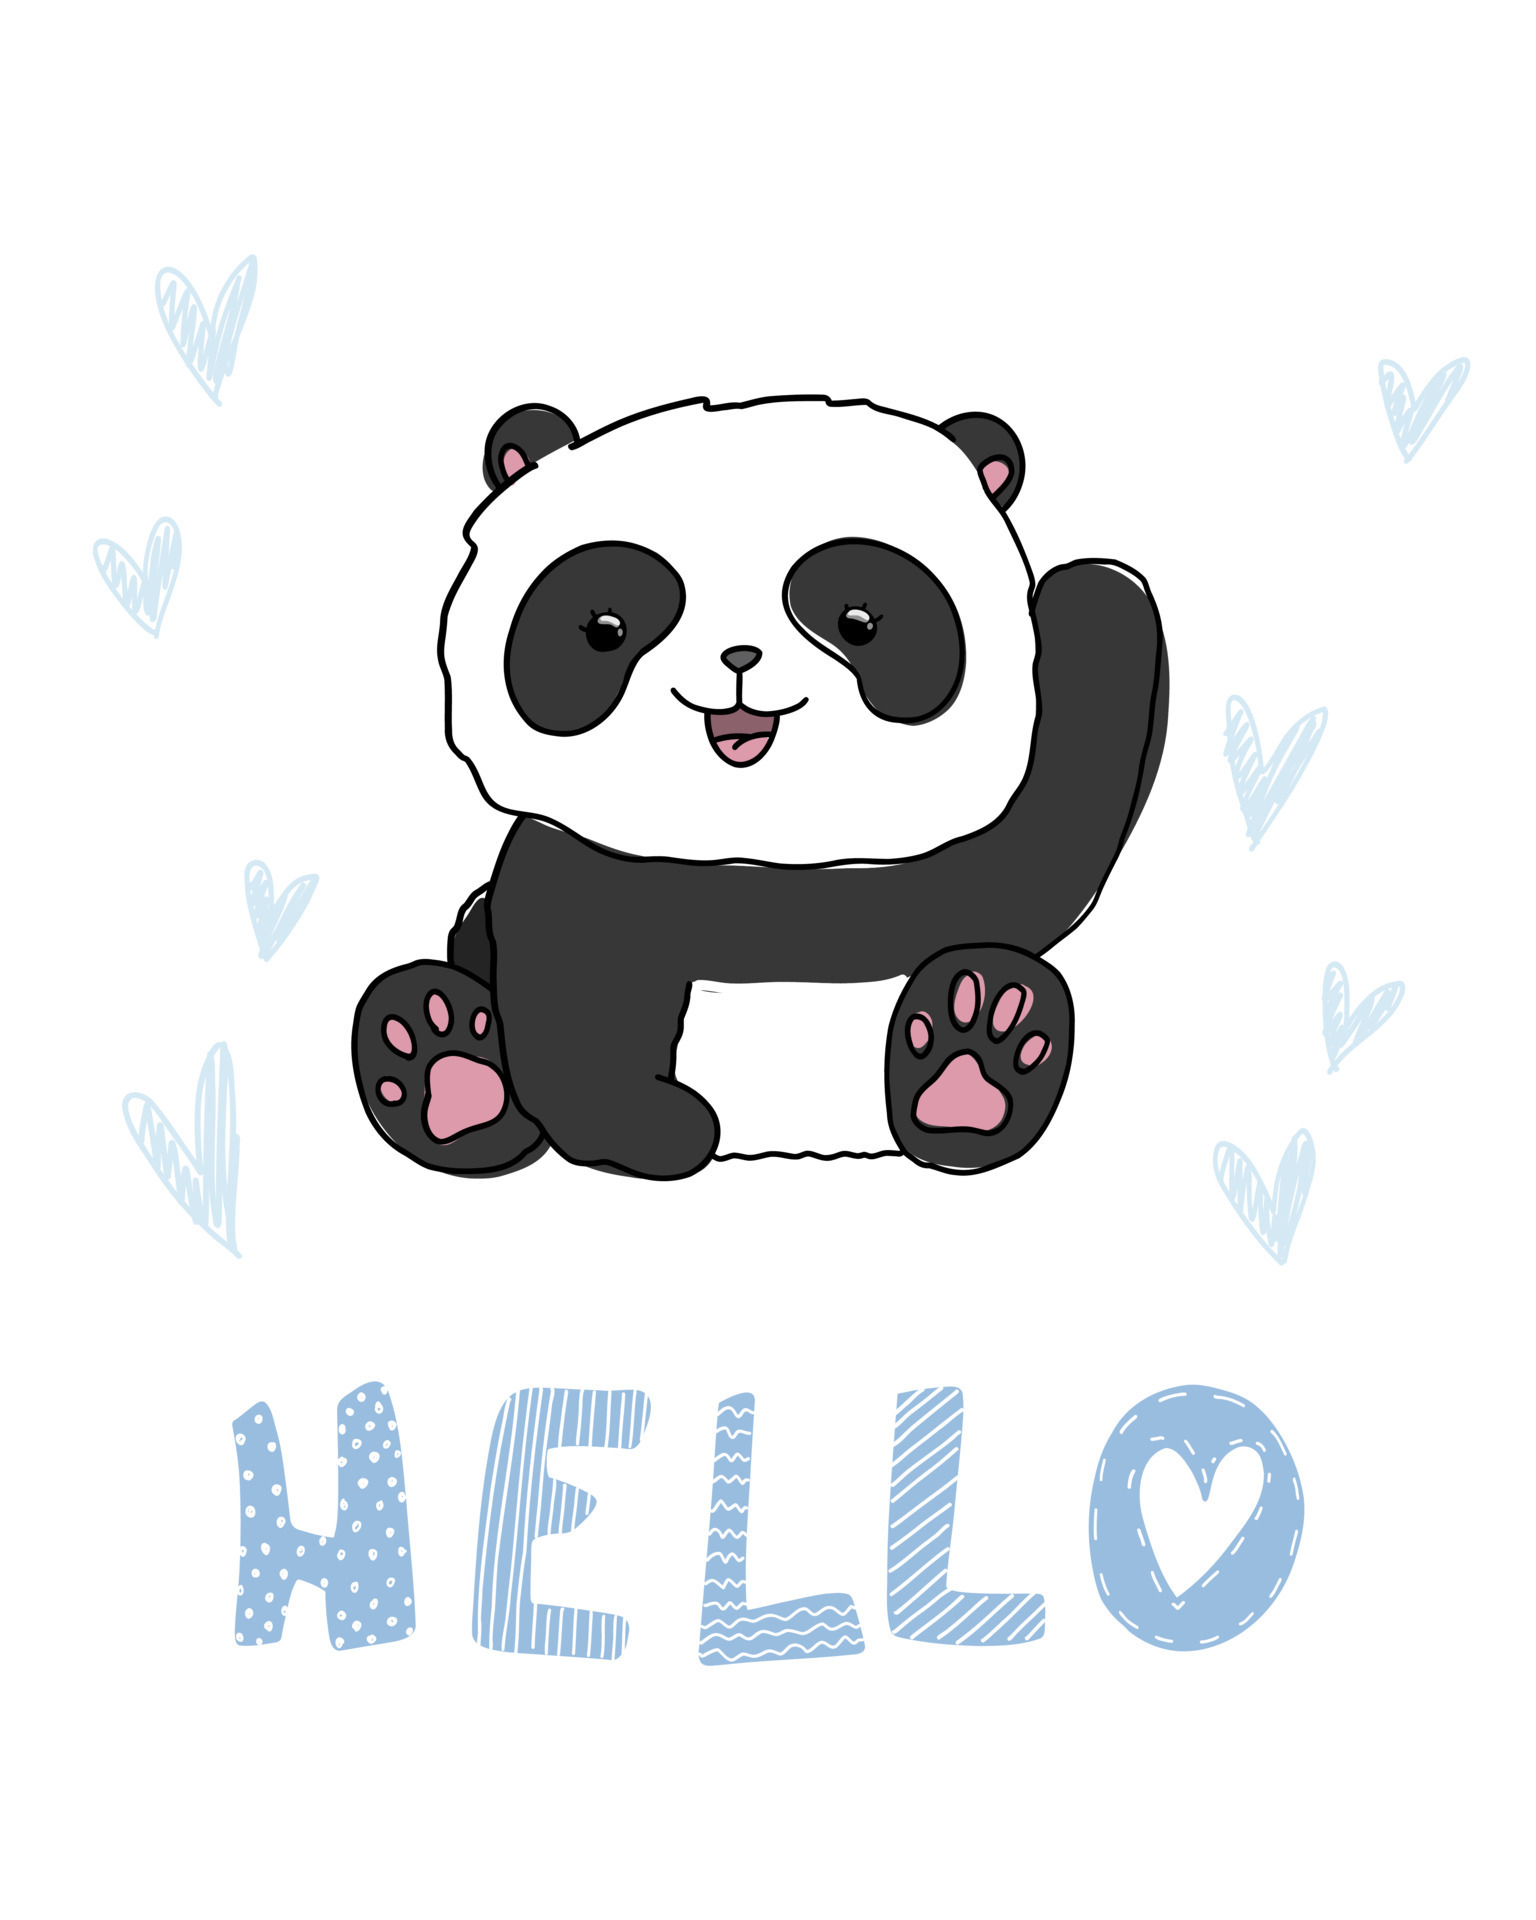 https://static.vecteezy.com/system/resources/previews/007/701/795/original/cute-little-panda-with-text-hello-baby-animal-illustration-for-kids-doodle-hearts-background-isolated-vector.jpg